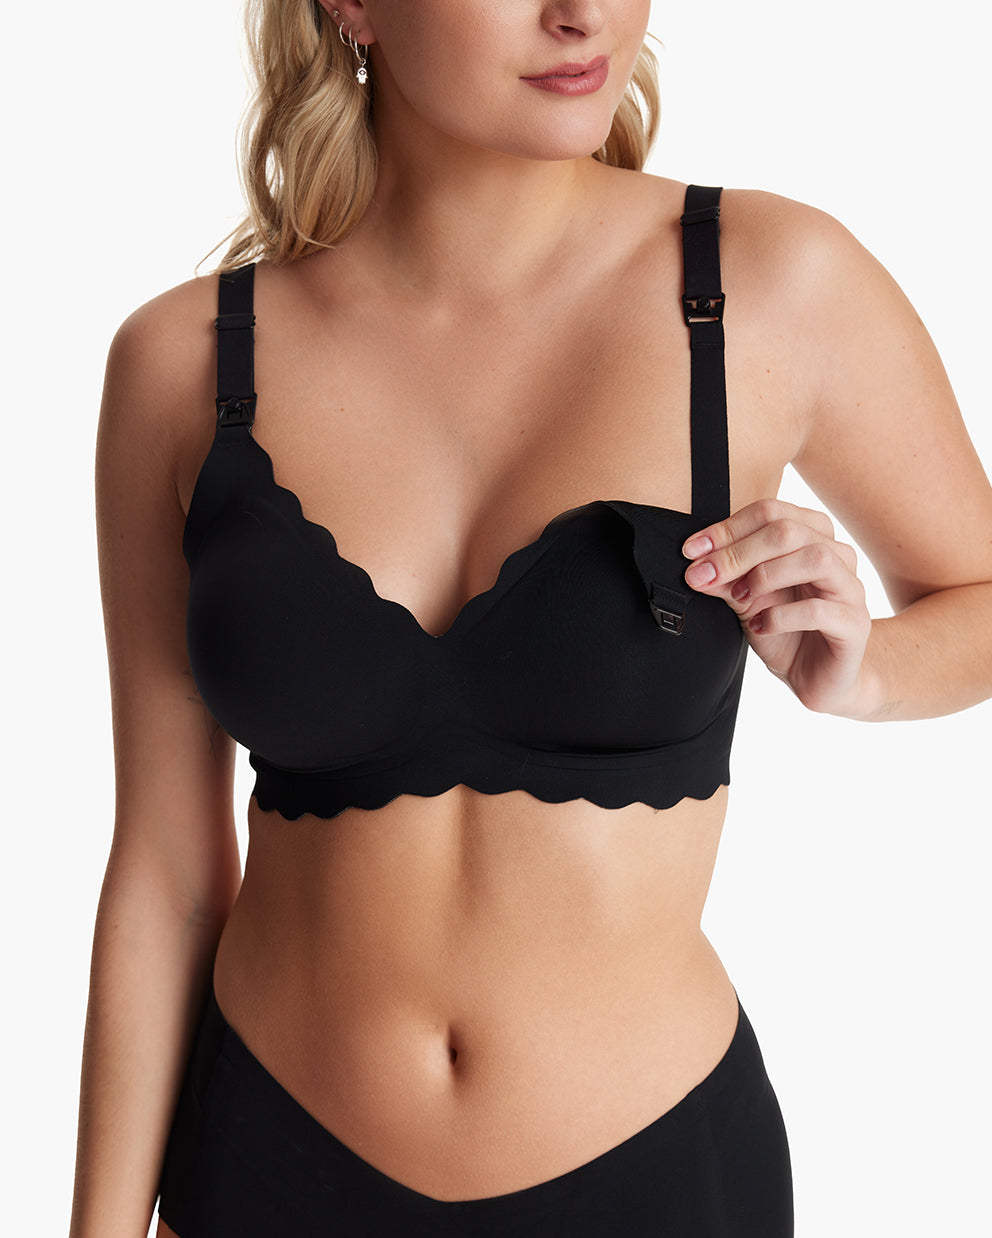 Beat the Summer Heat with Momcozy's Breathable Nursing Bra for